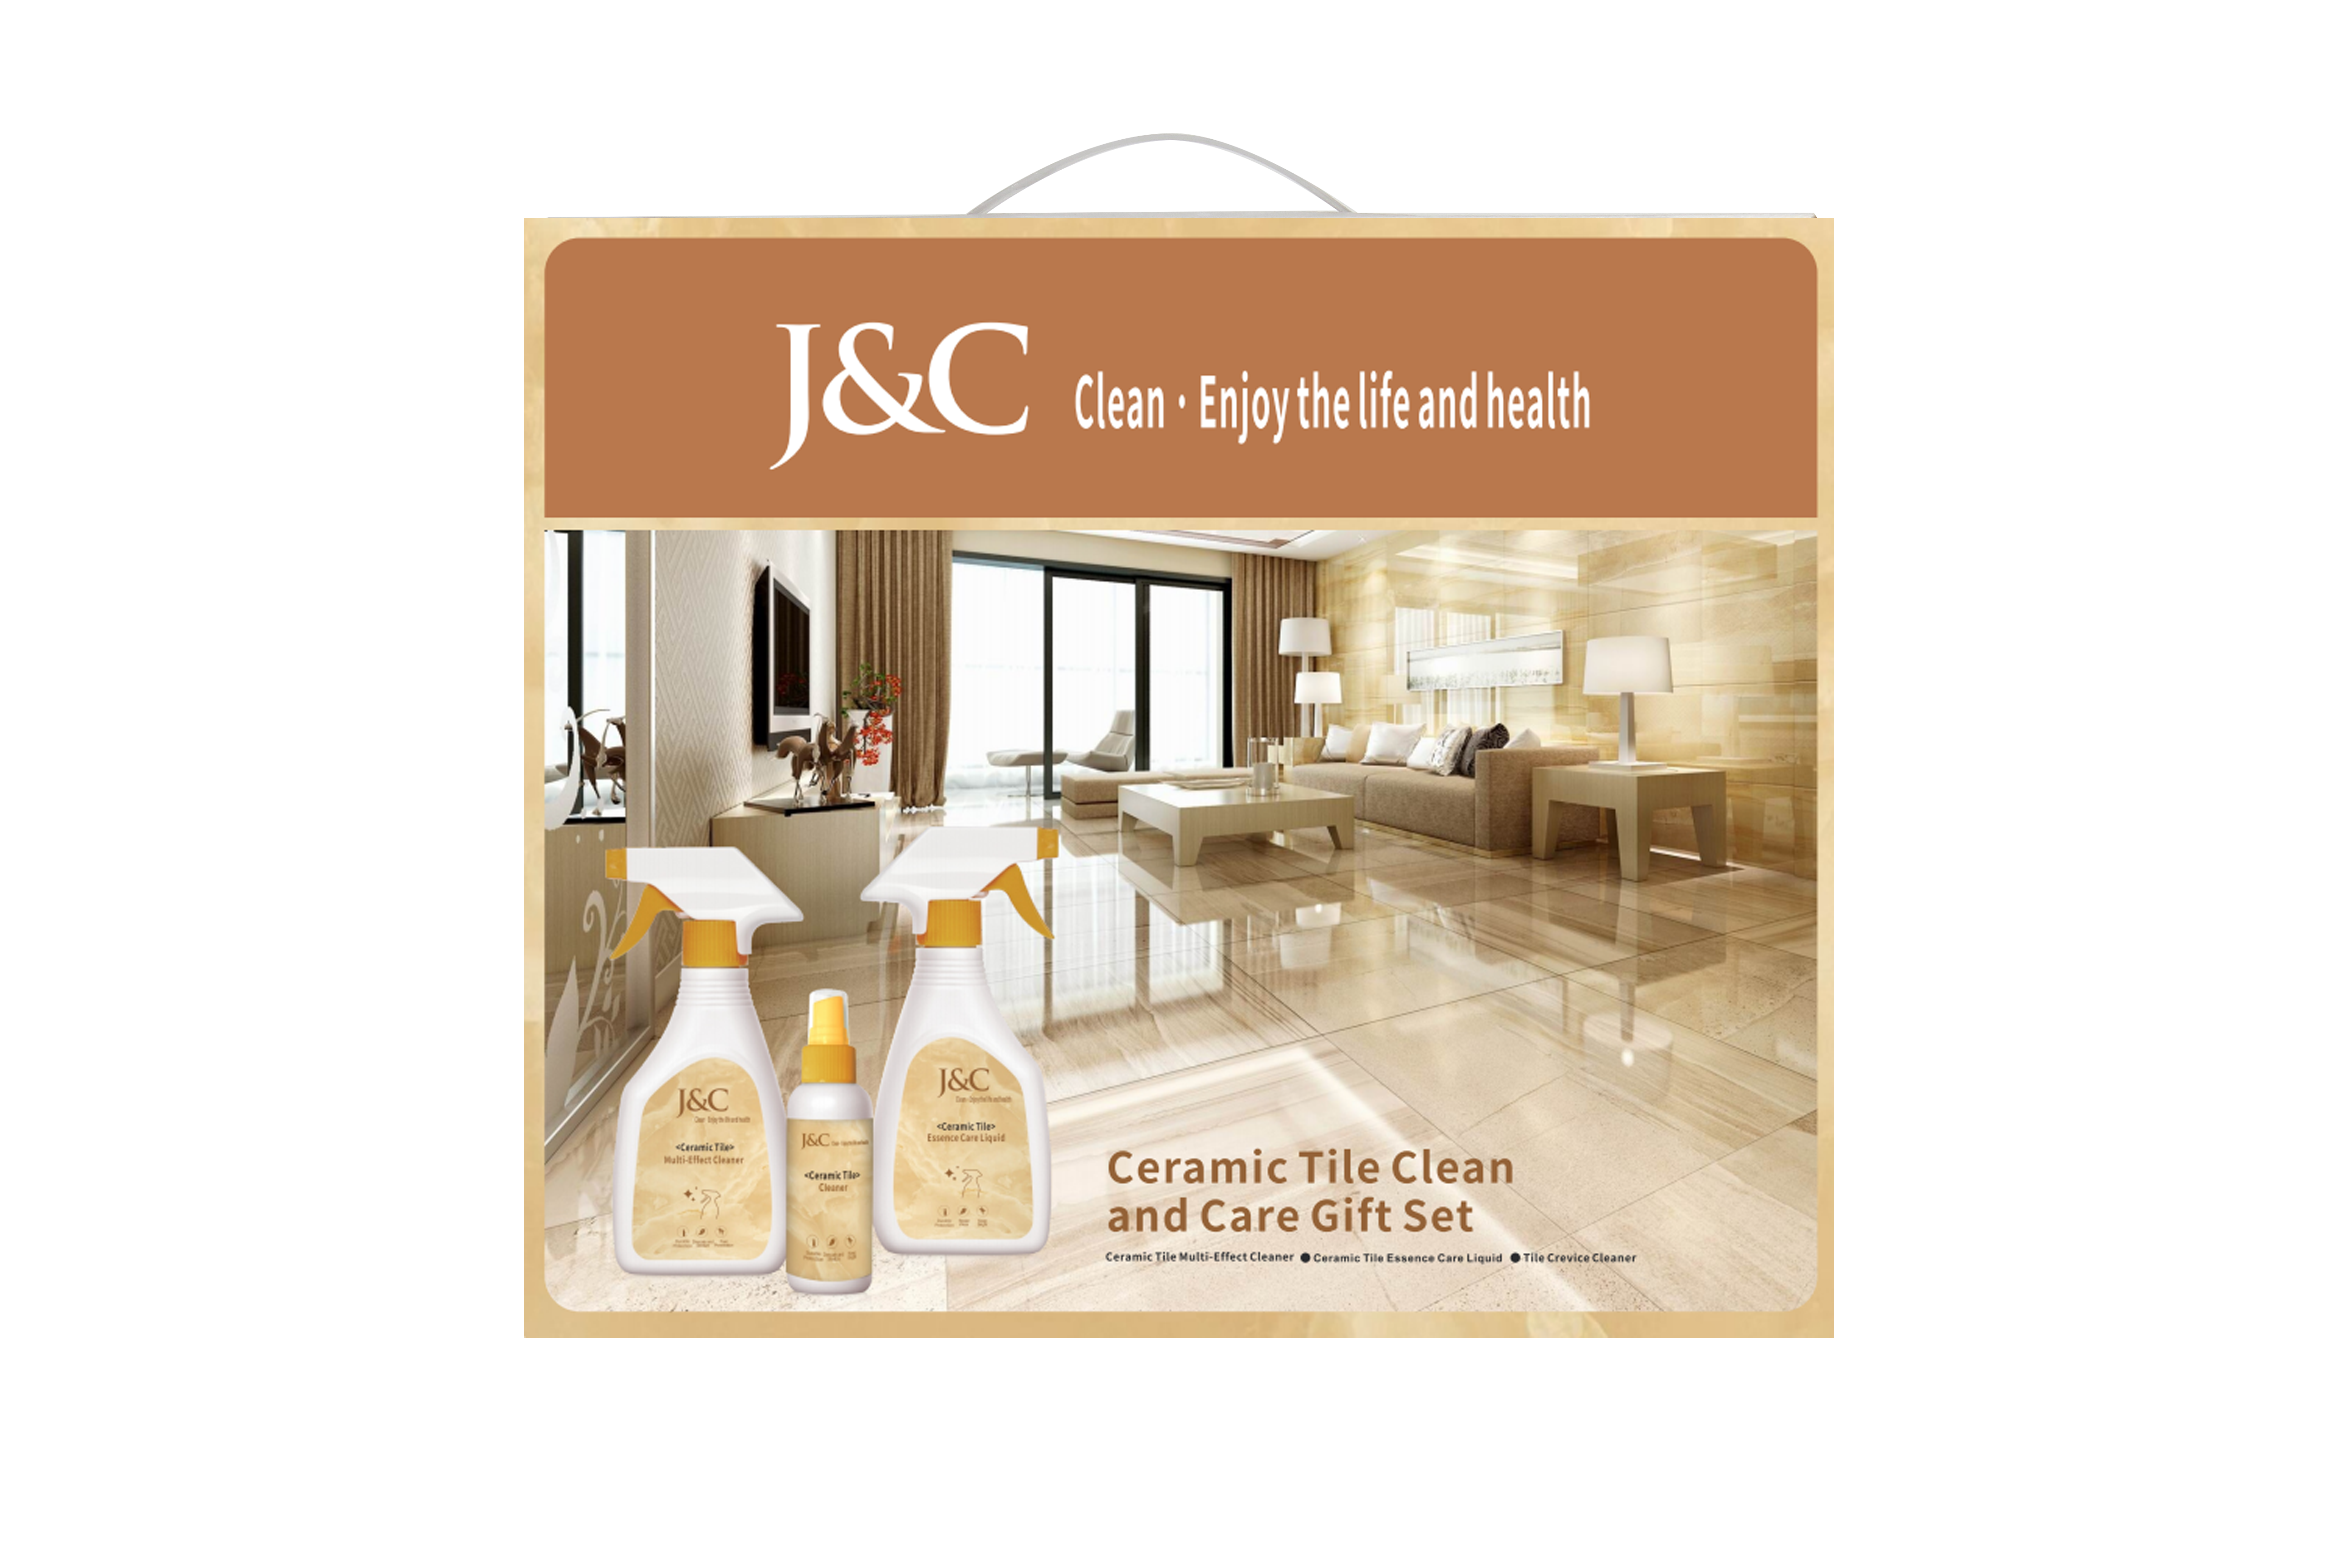 Ceramic Tile Clean and Care Gift Set